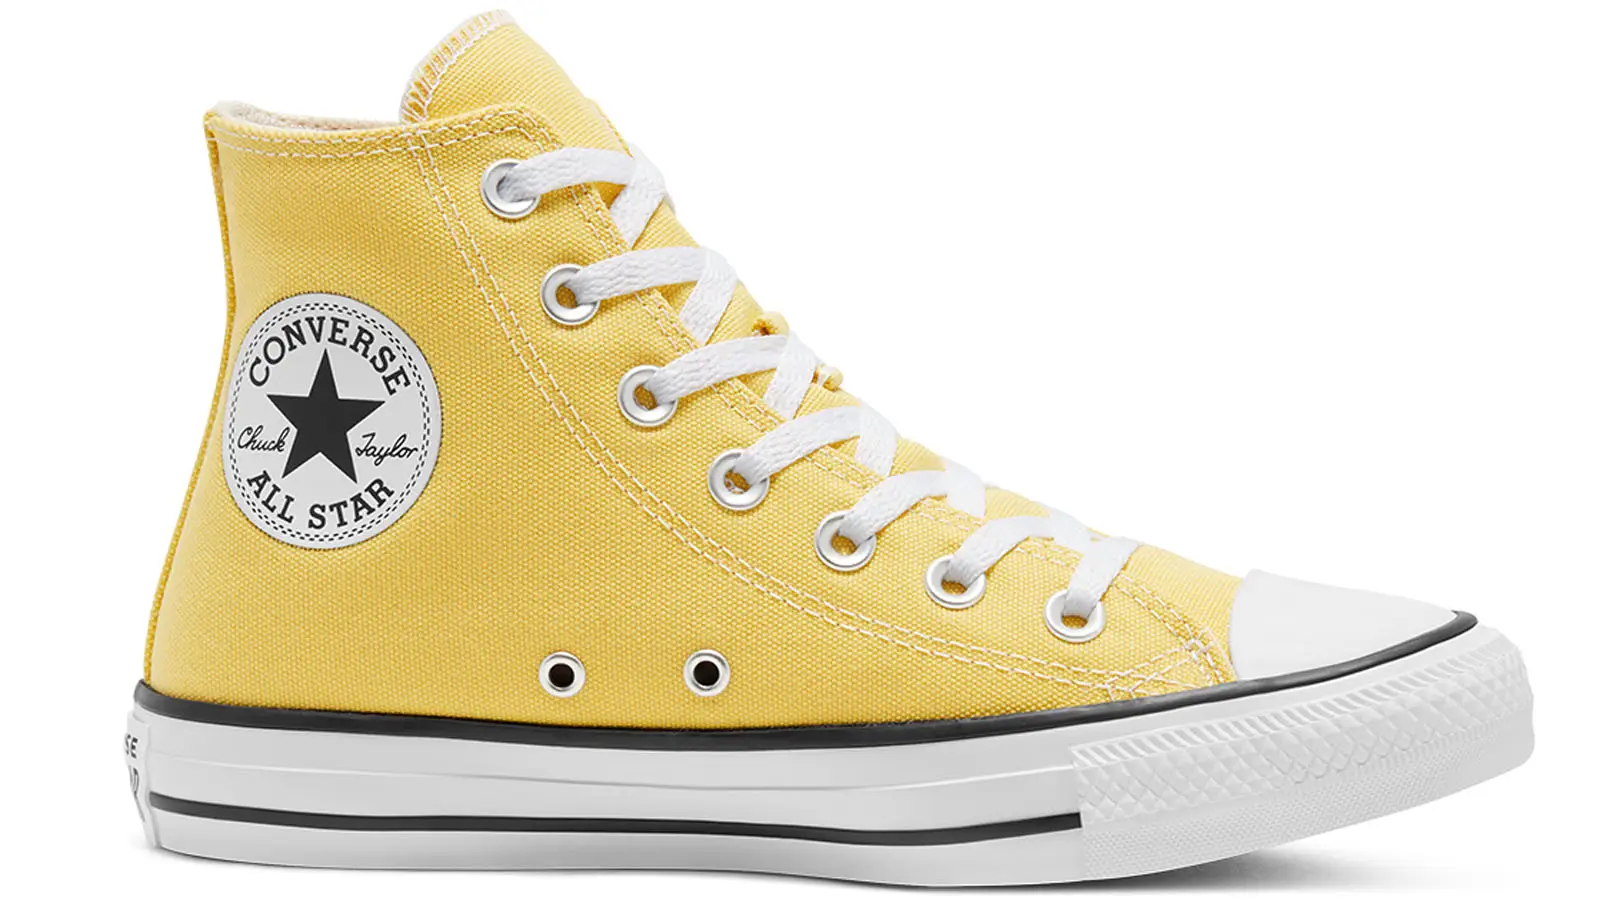 These Are The Converse Sneakers We’re Loving Right Now | The Sole Supplier